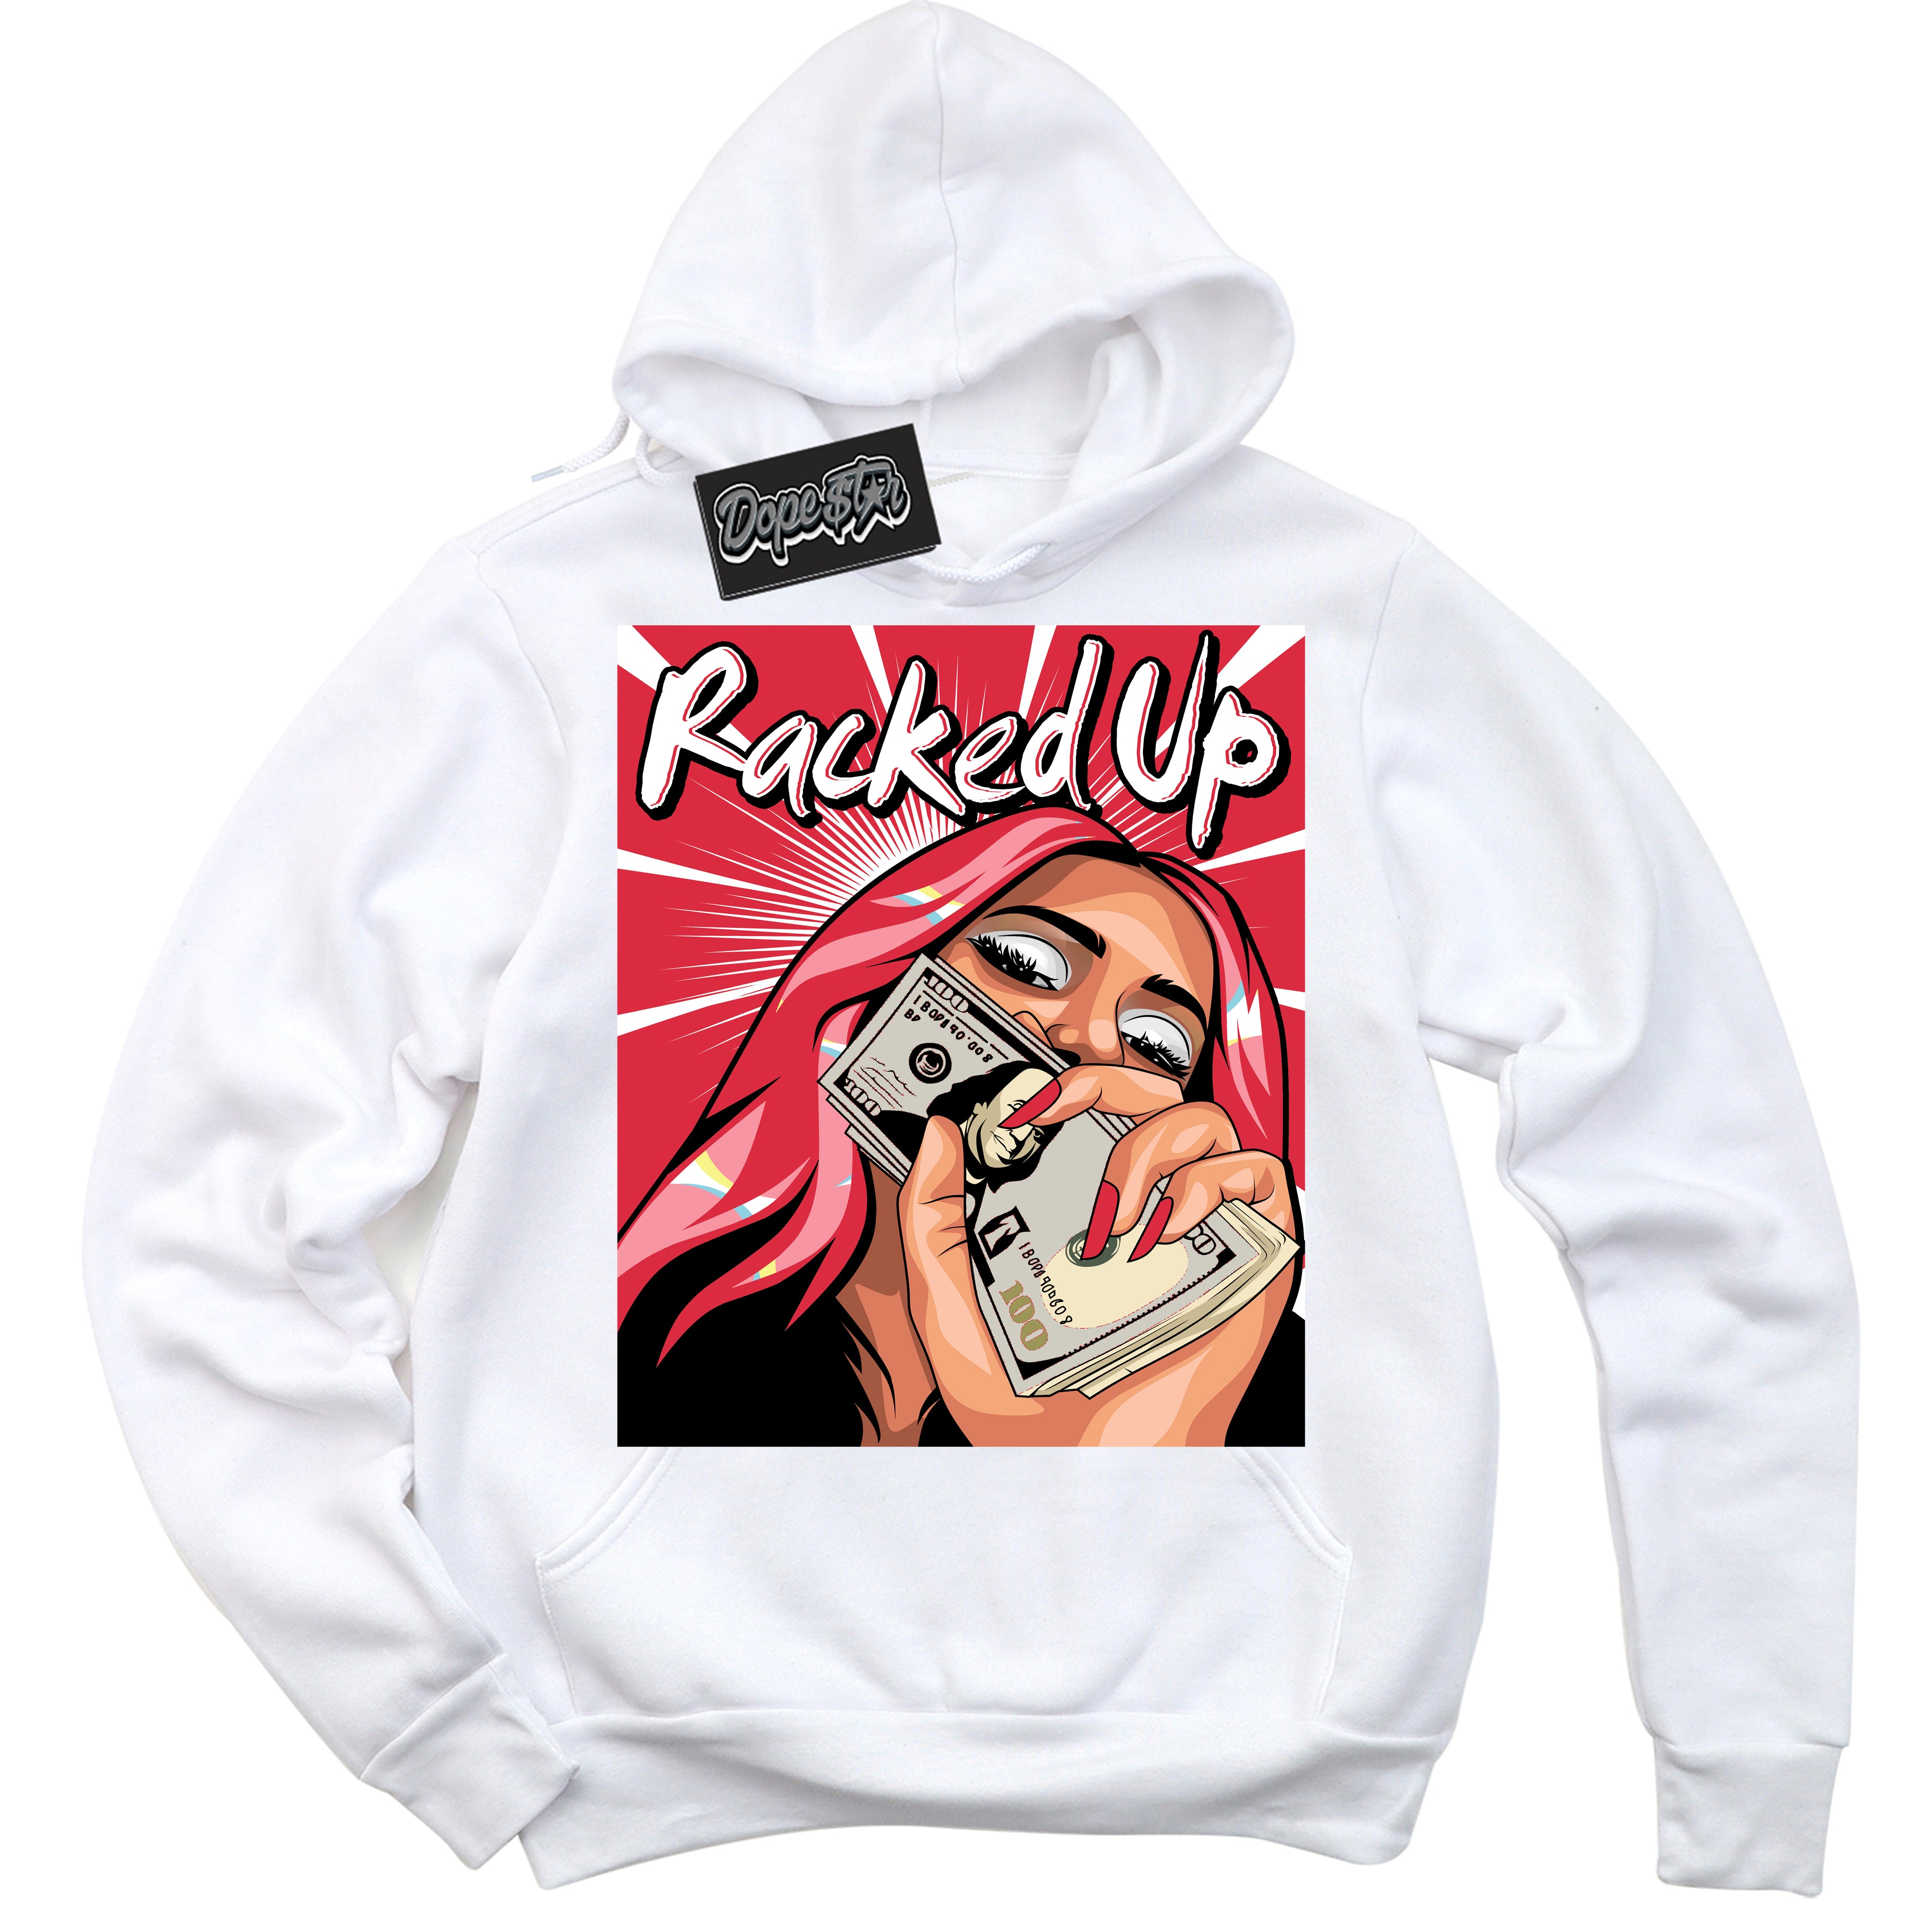 Cool White Graphic DopeStar Hoodie with “ Racked Up “ print, that perfectly matches Spider-Verse 1s sneakers